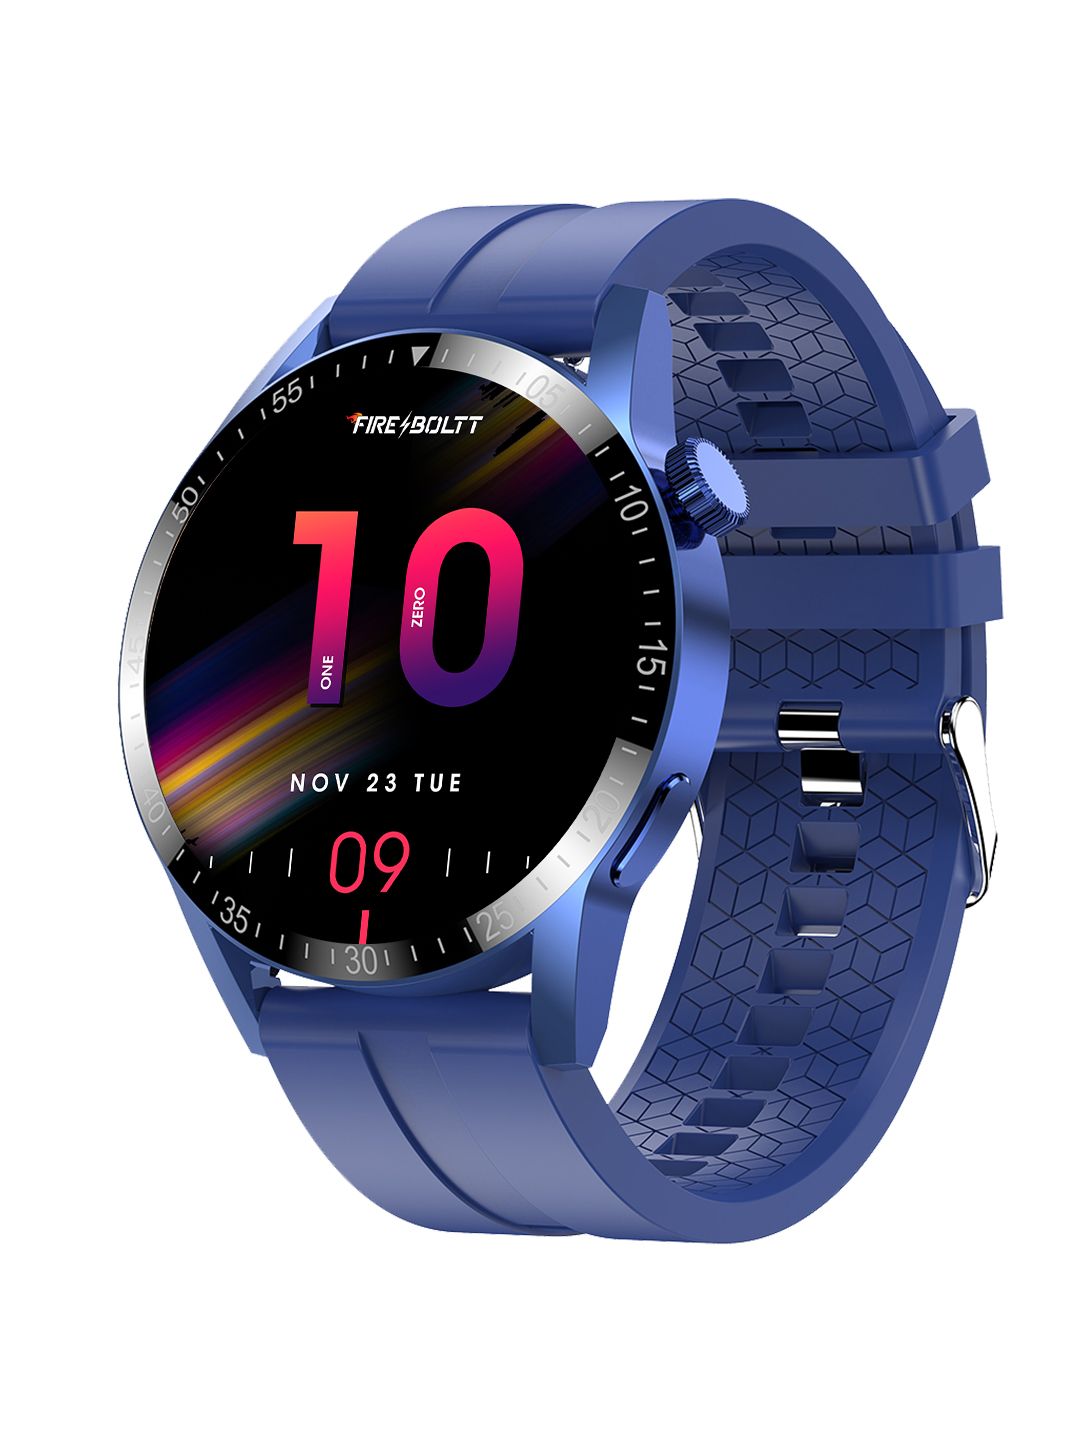 Fire-Boltt Talk Pro Smart Watch - Blue 38BSWAAY-2 Price in India